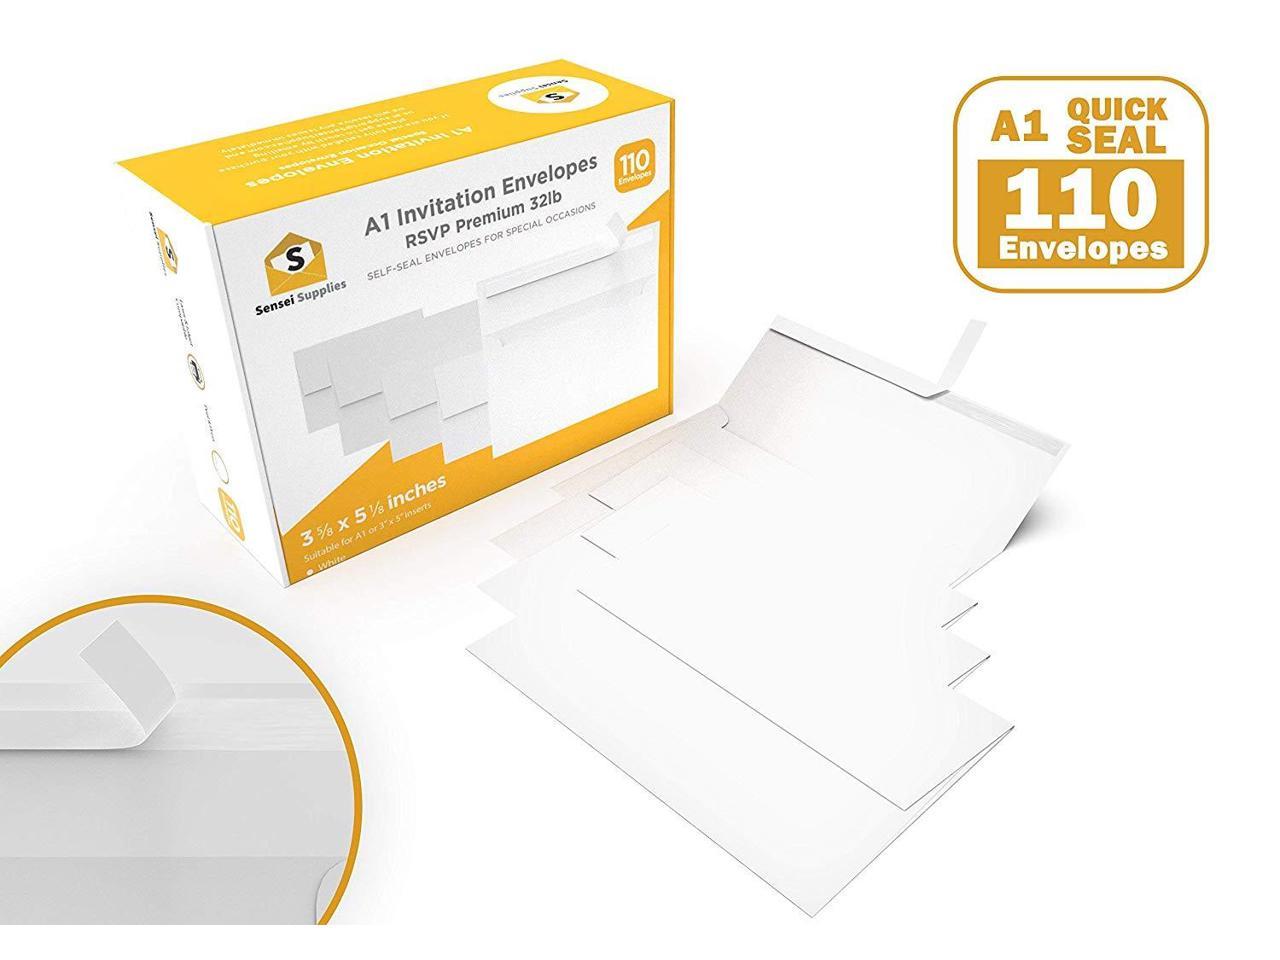 Press & Self Seal 3 5/8 x 5 1/8 inches Baby Showers Photos and any 3” x 5” inserts Thank You Notes 110 3.5x5 White RSVP Small Envelopes Square Flap For Weddings Response Cards A1 - W/Peel 